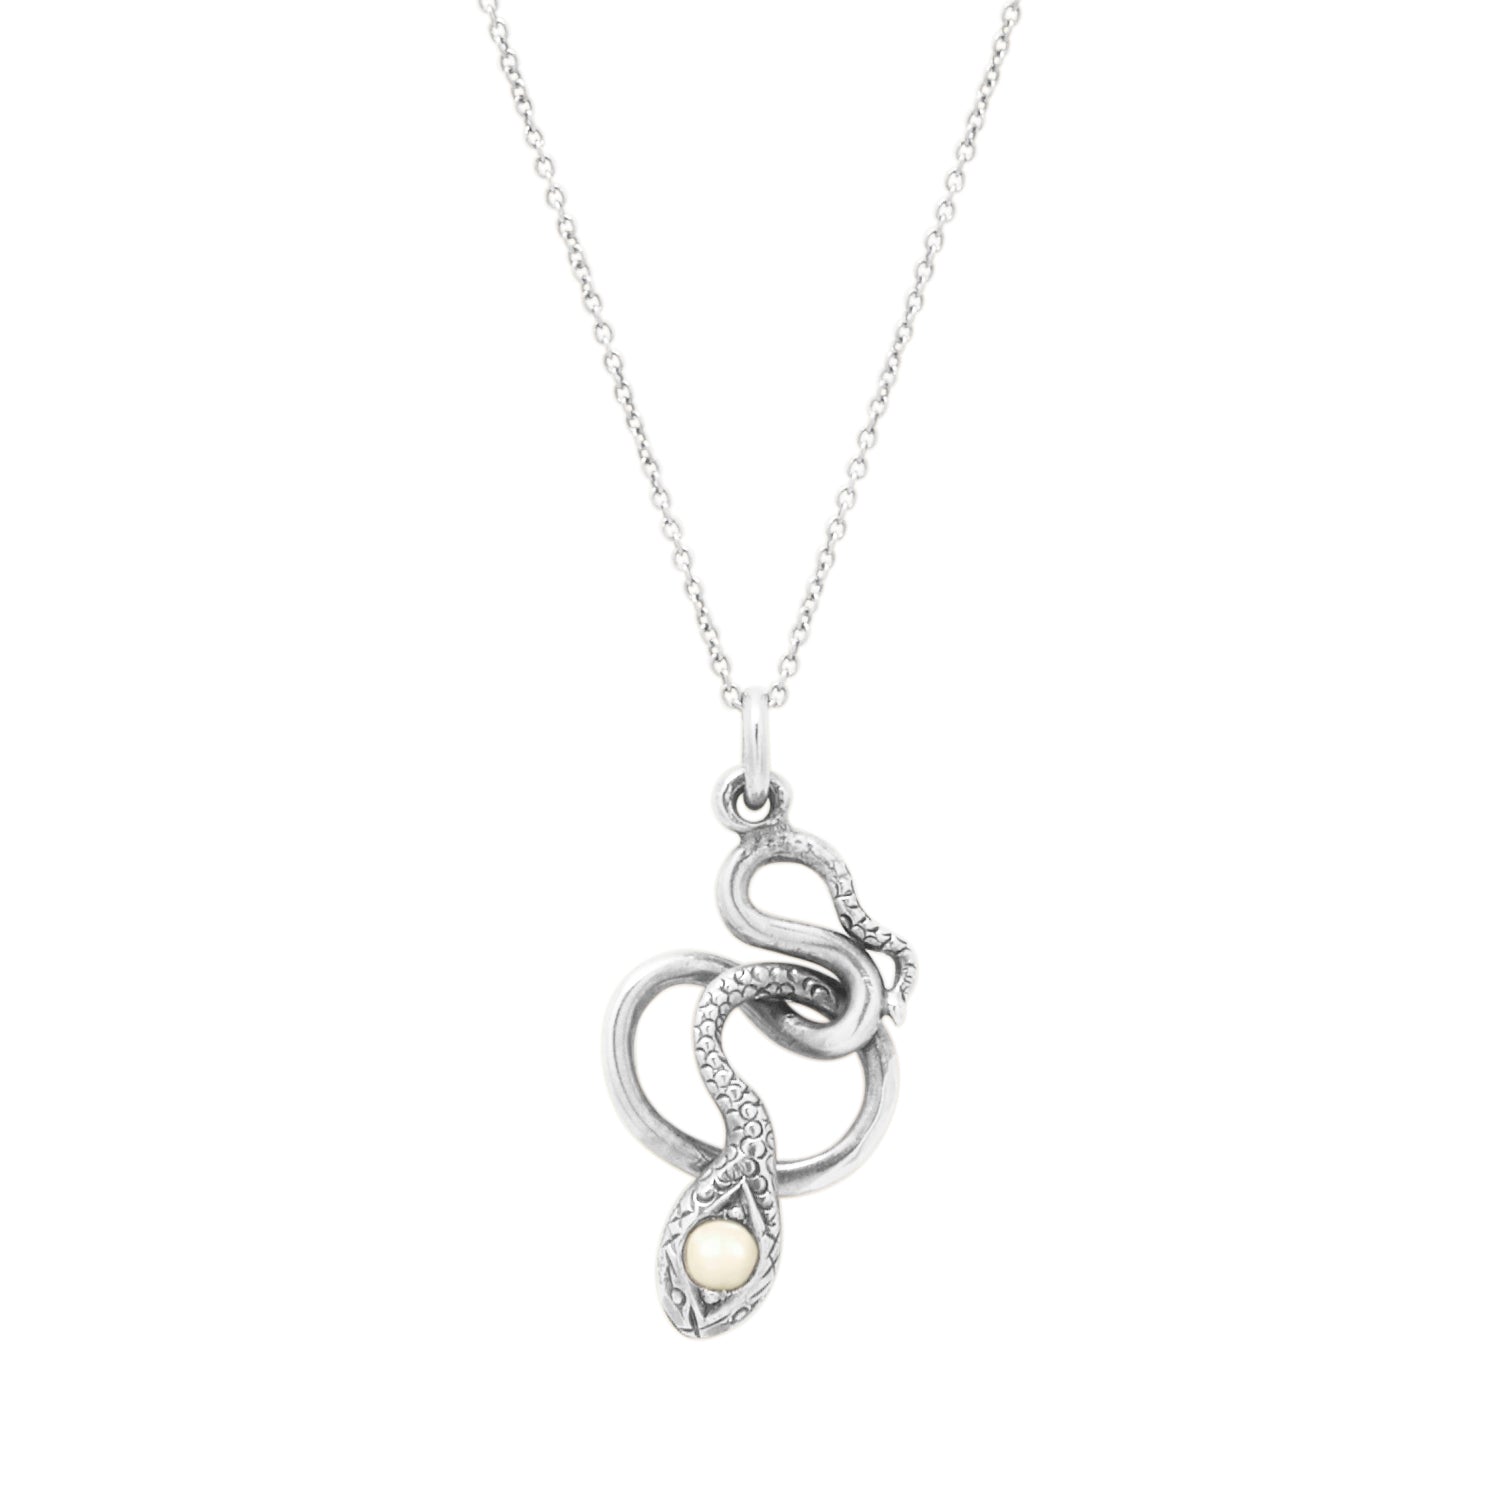 The F&B White Gold Snake Charmer Necklace